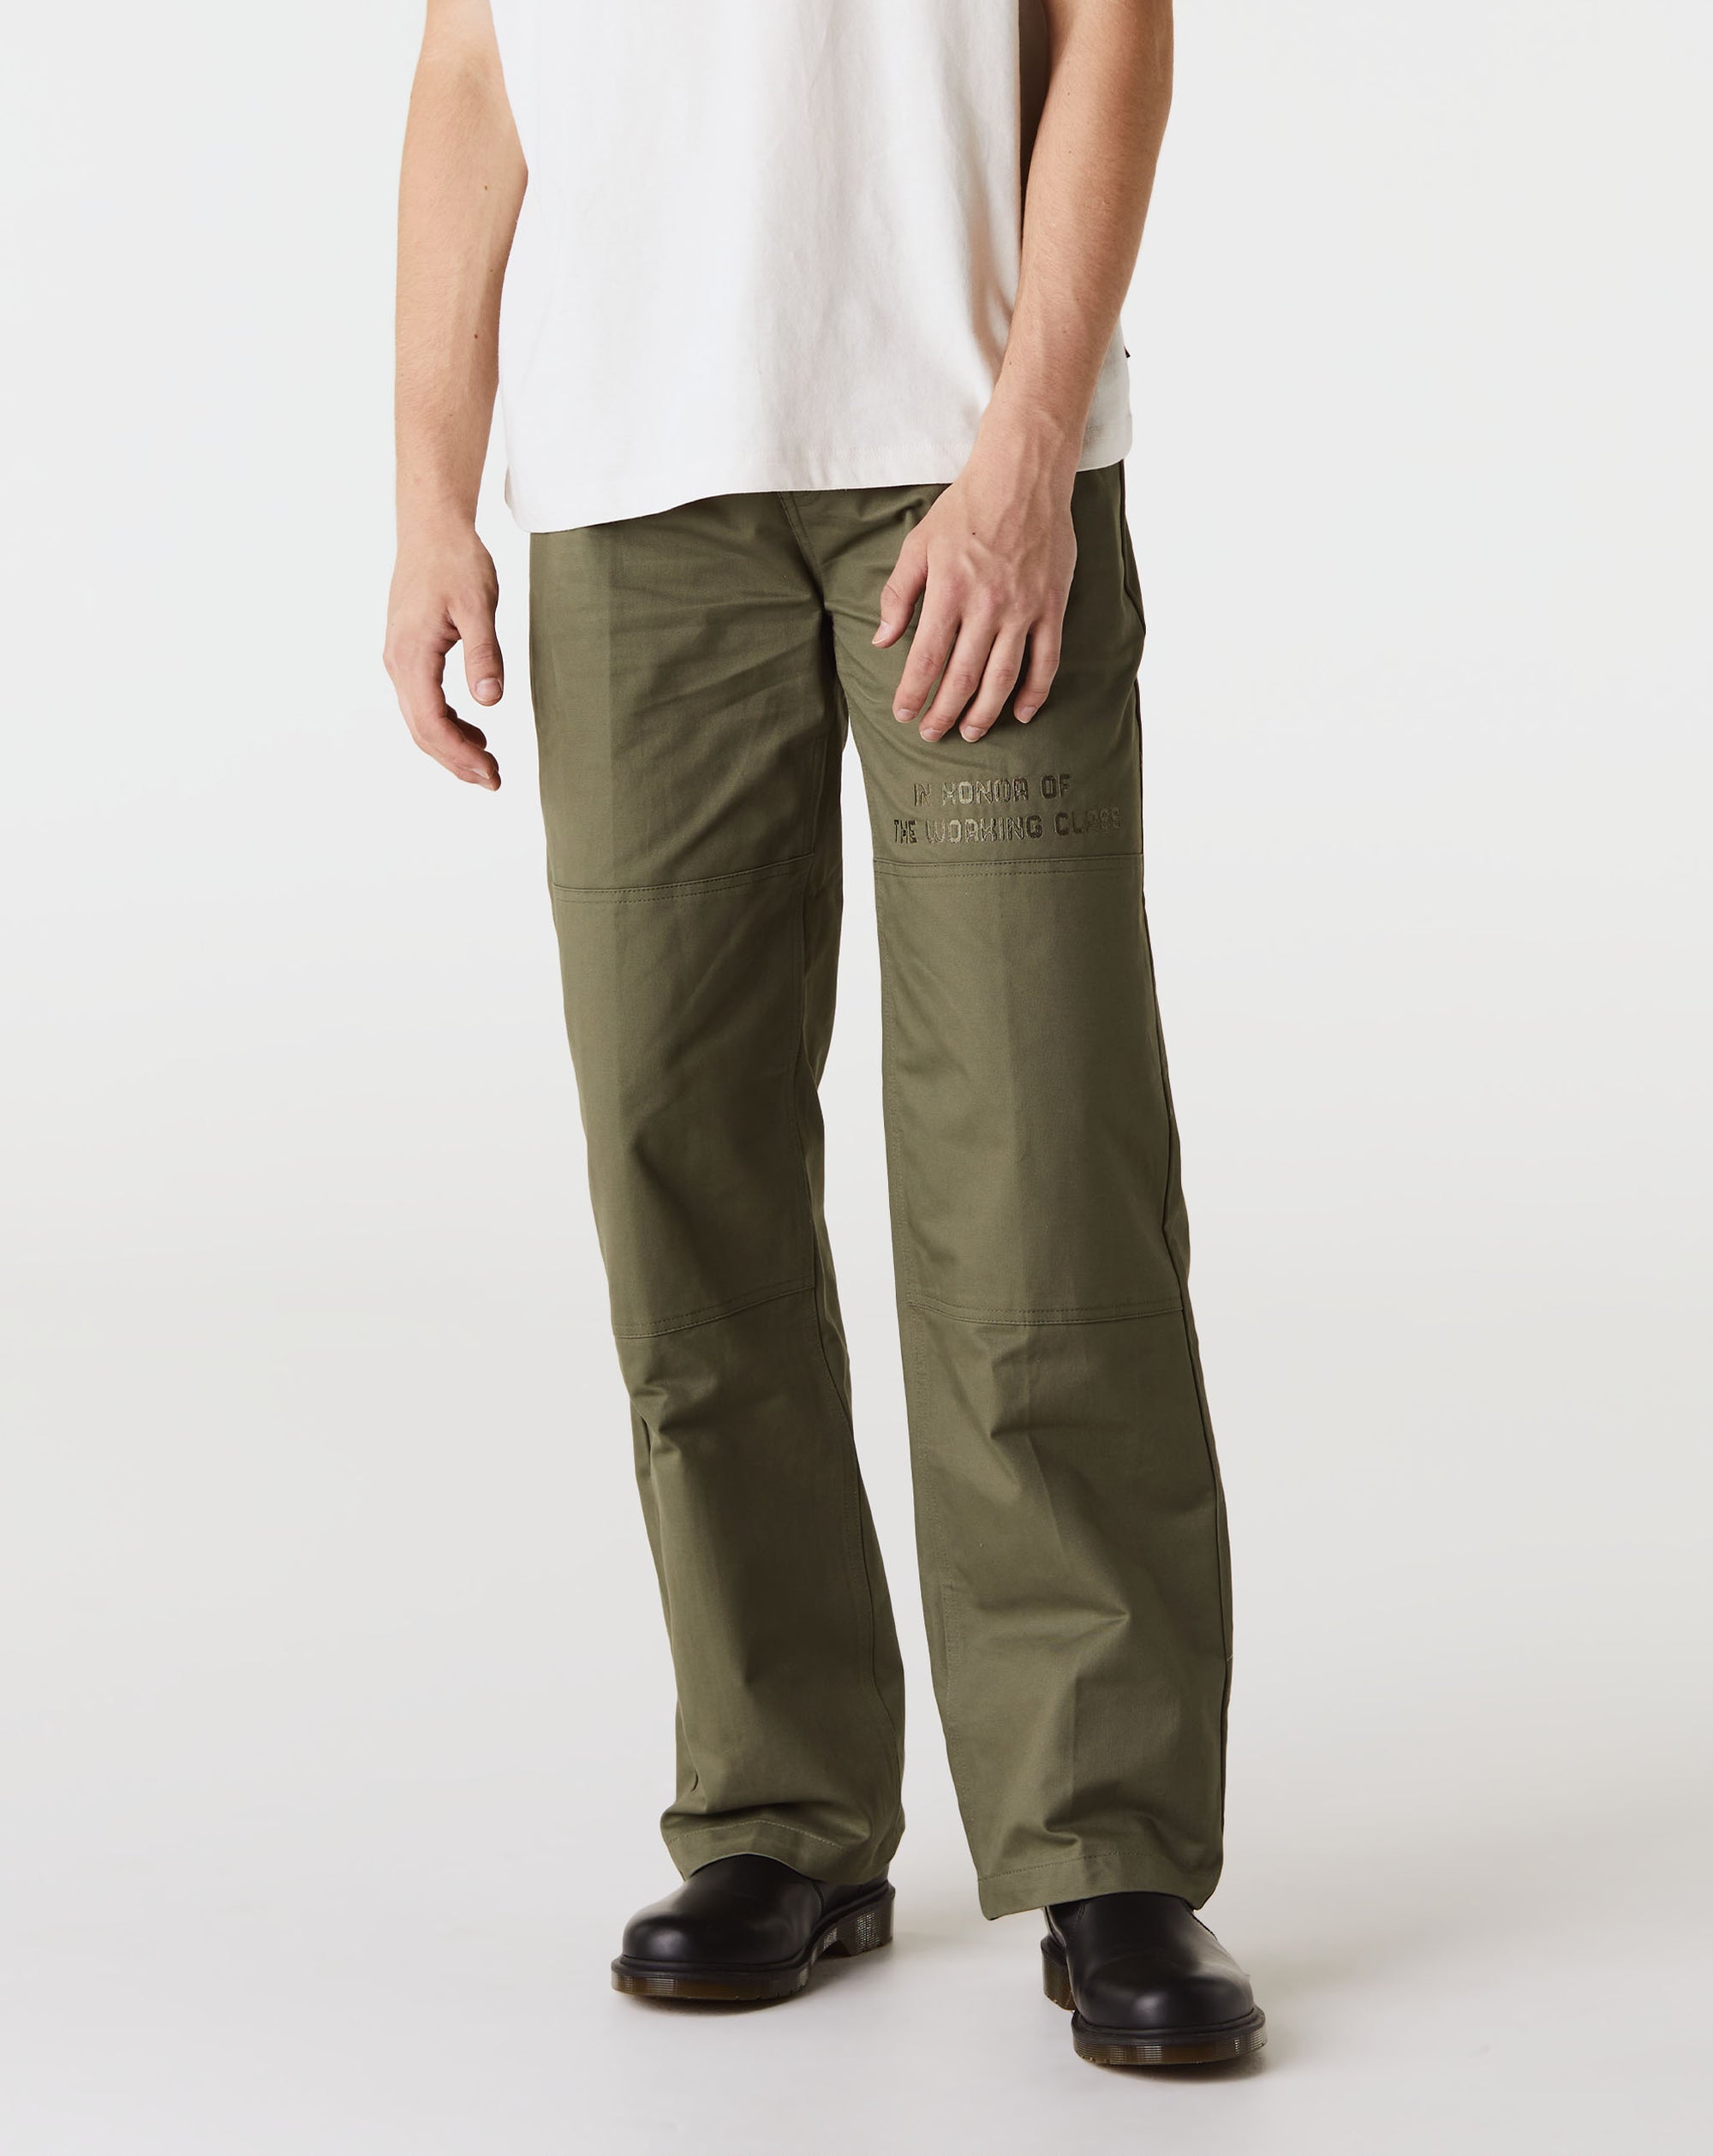 Honor The Gift Shop Pants - Rule of Next Apparel